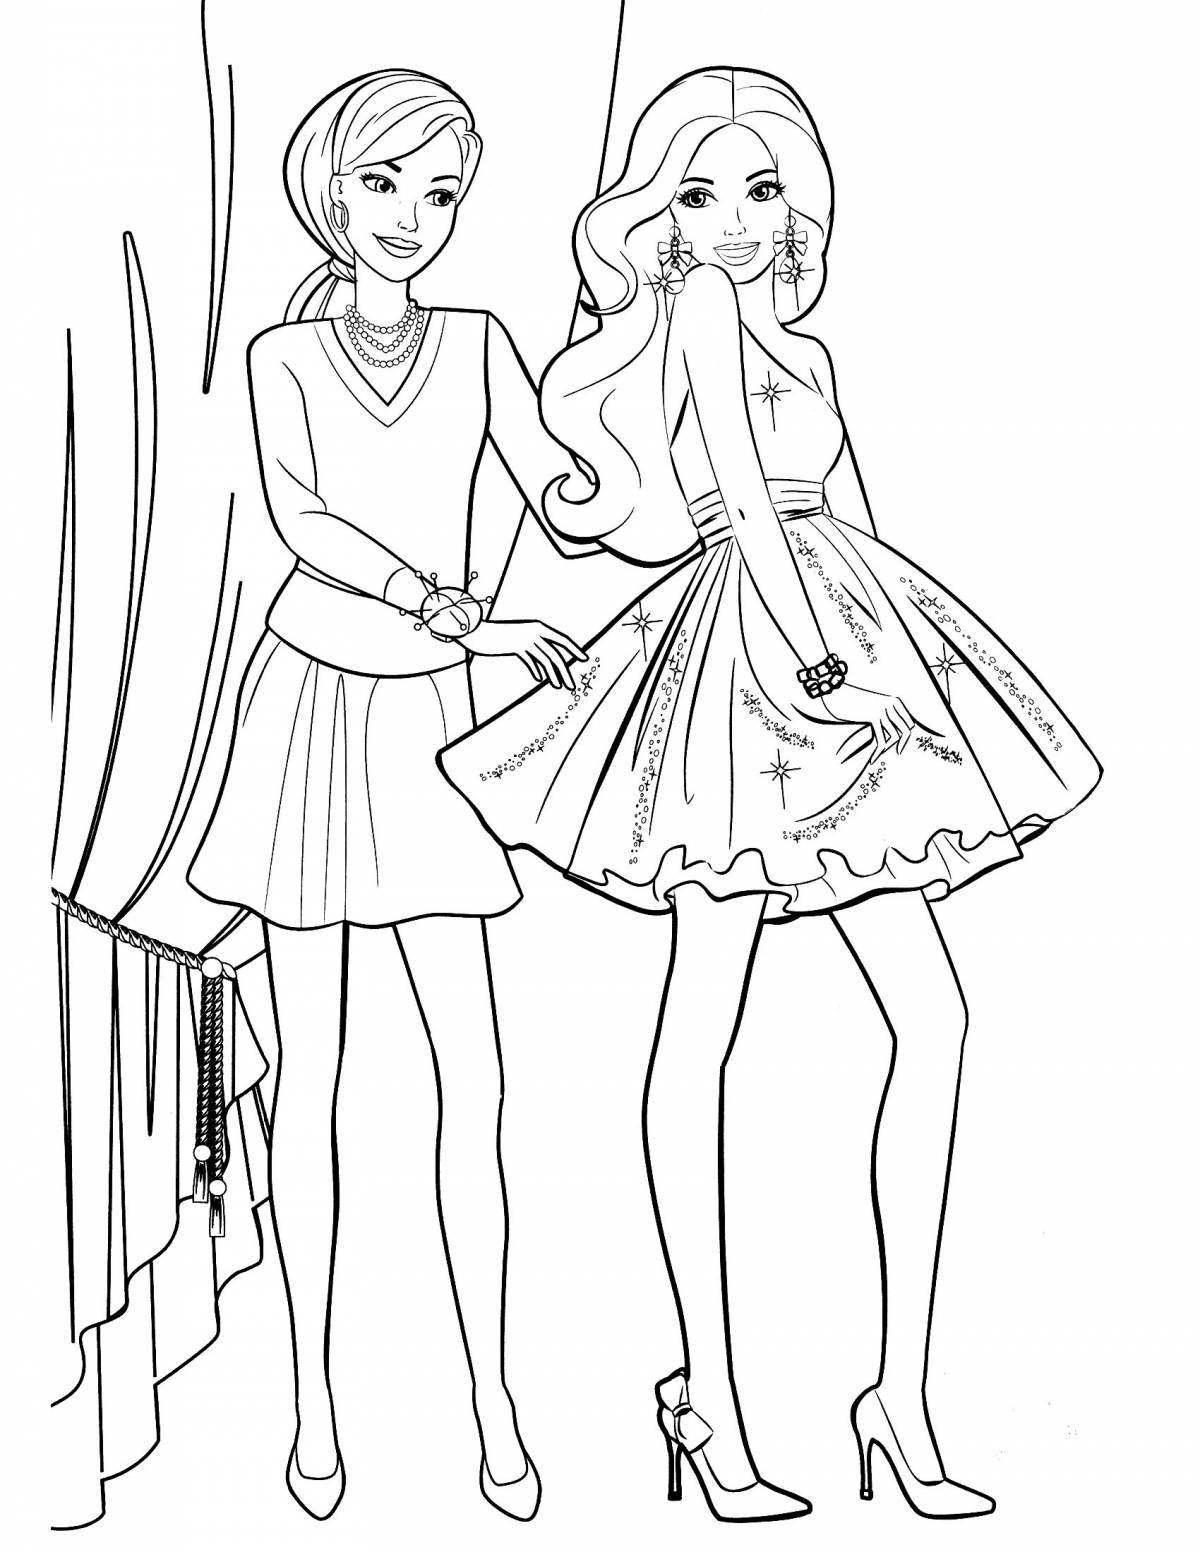 Exotic barbie doll coloring pages